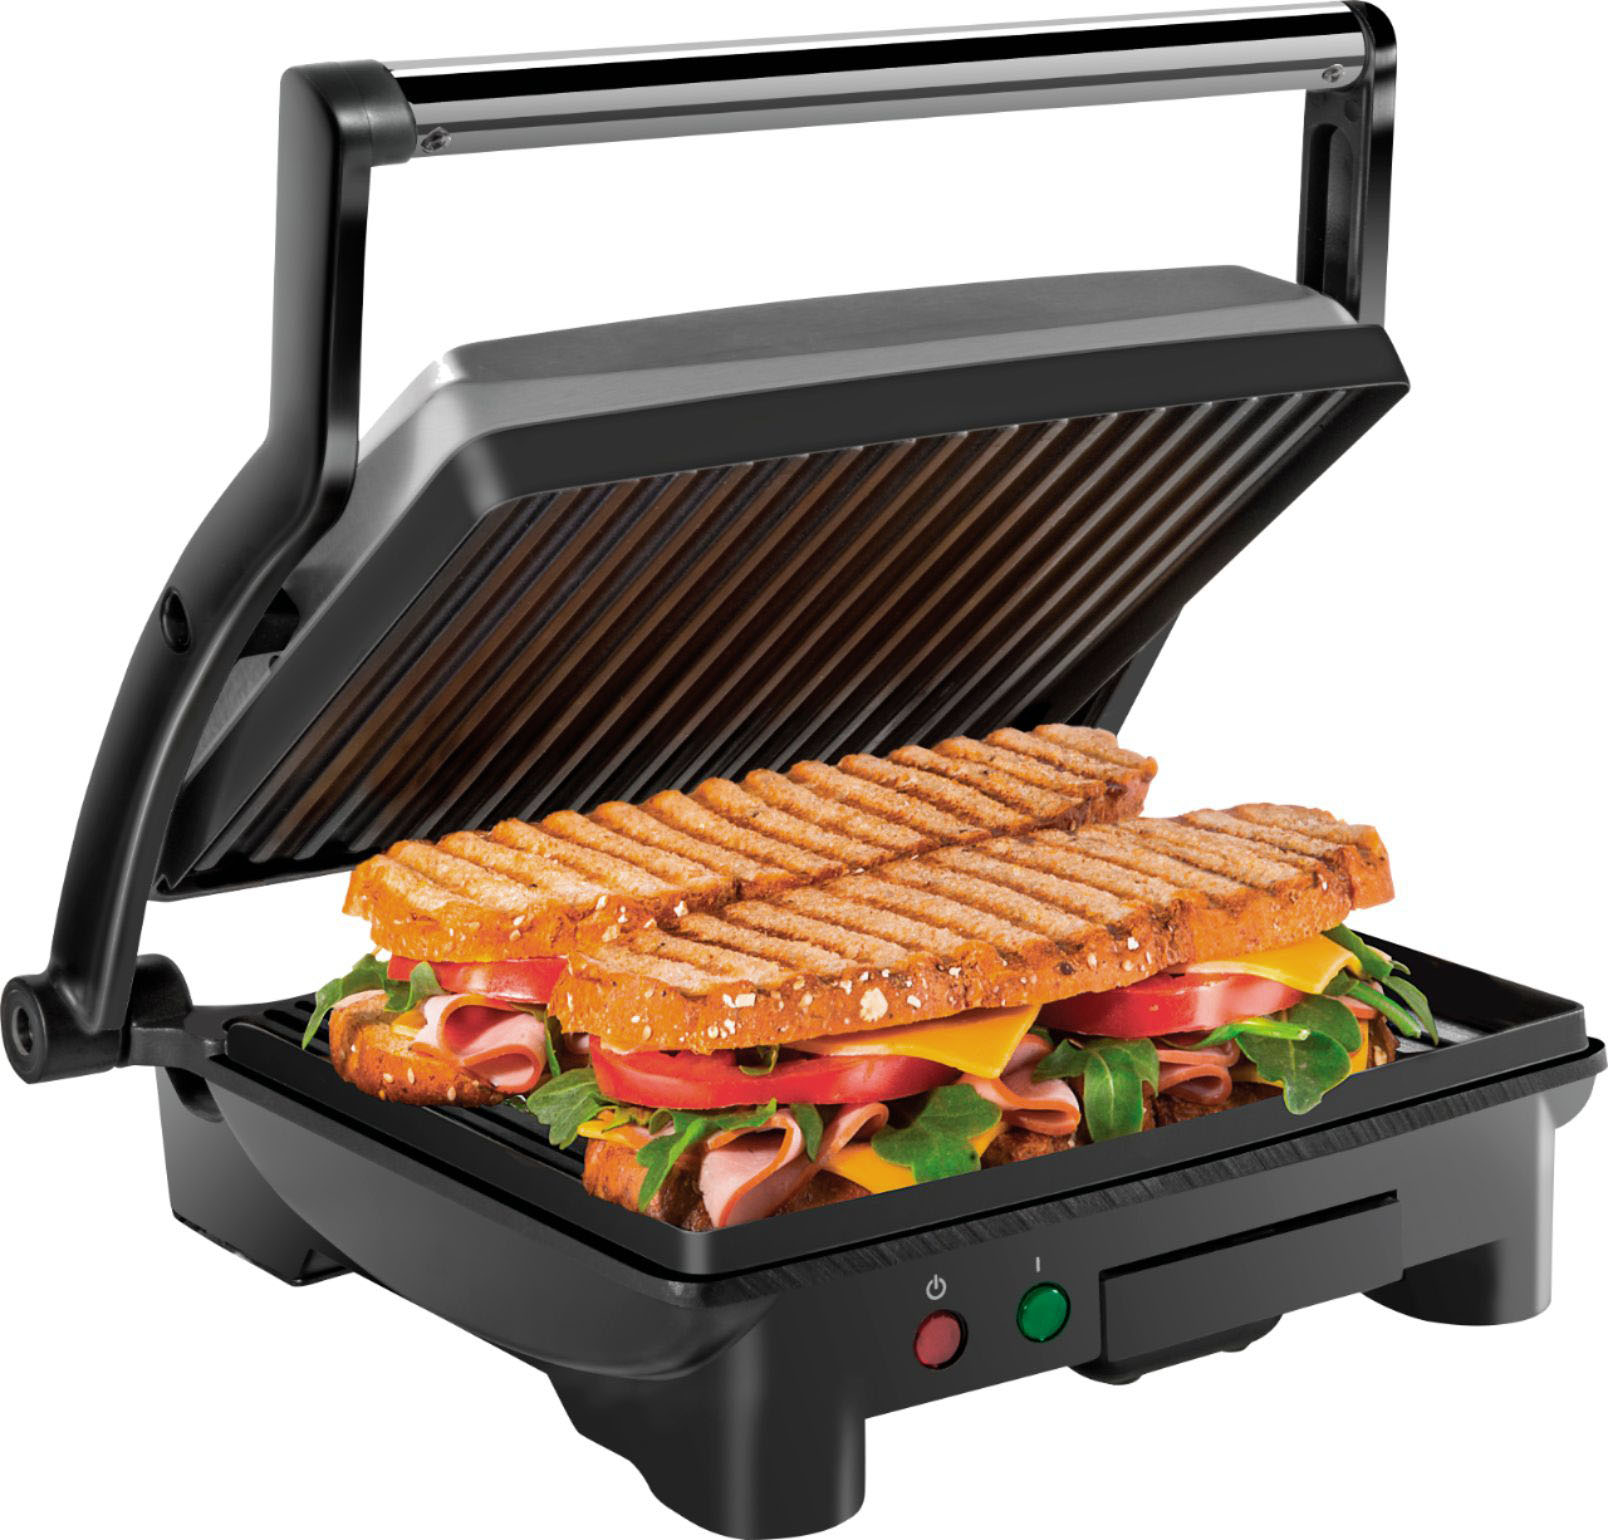 Angle View: Chefman Electric 4 Slice Panini Press Grill and Sandwich Maker - Stainless Steel